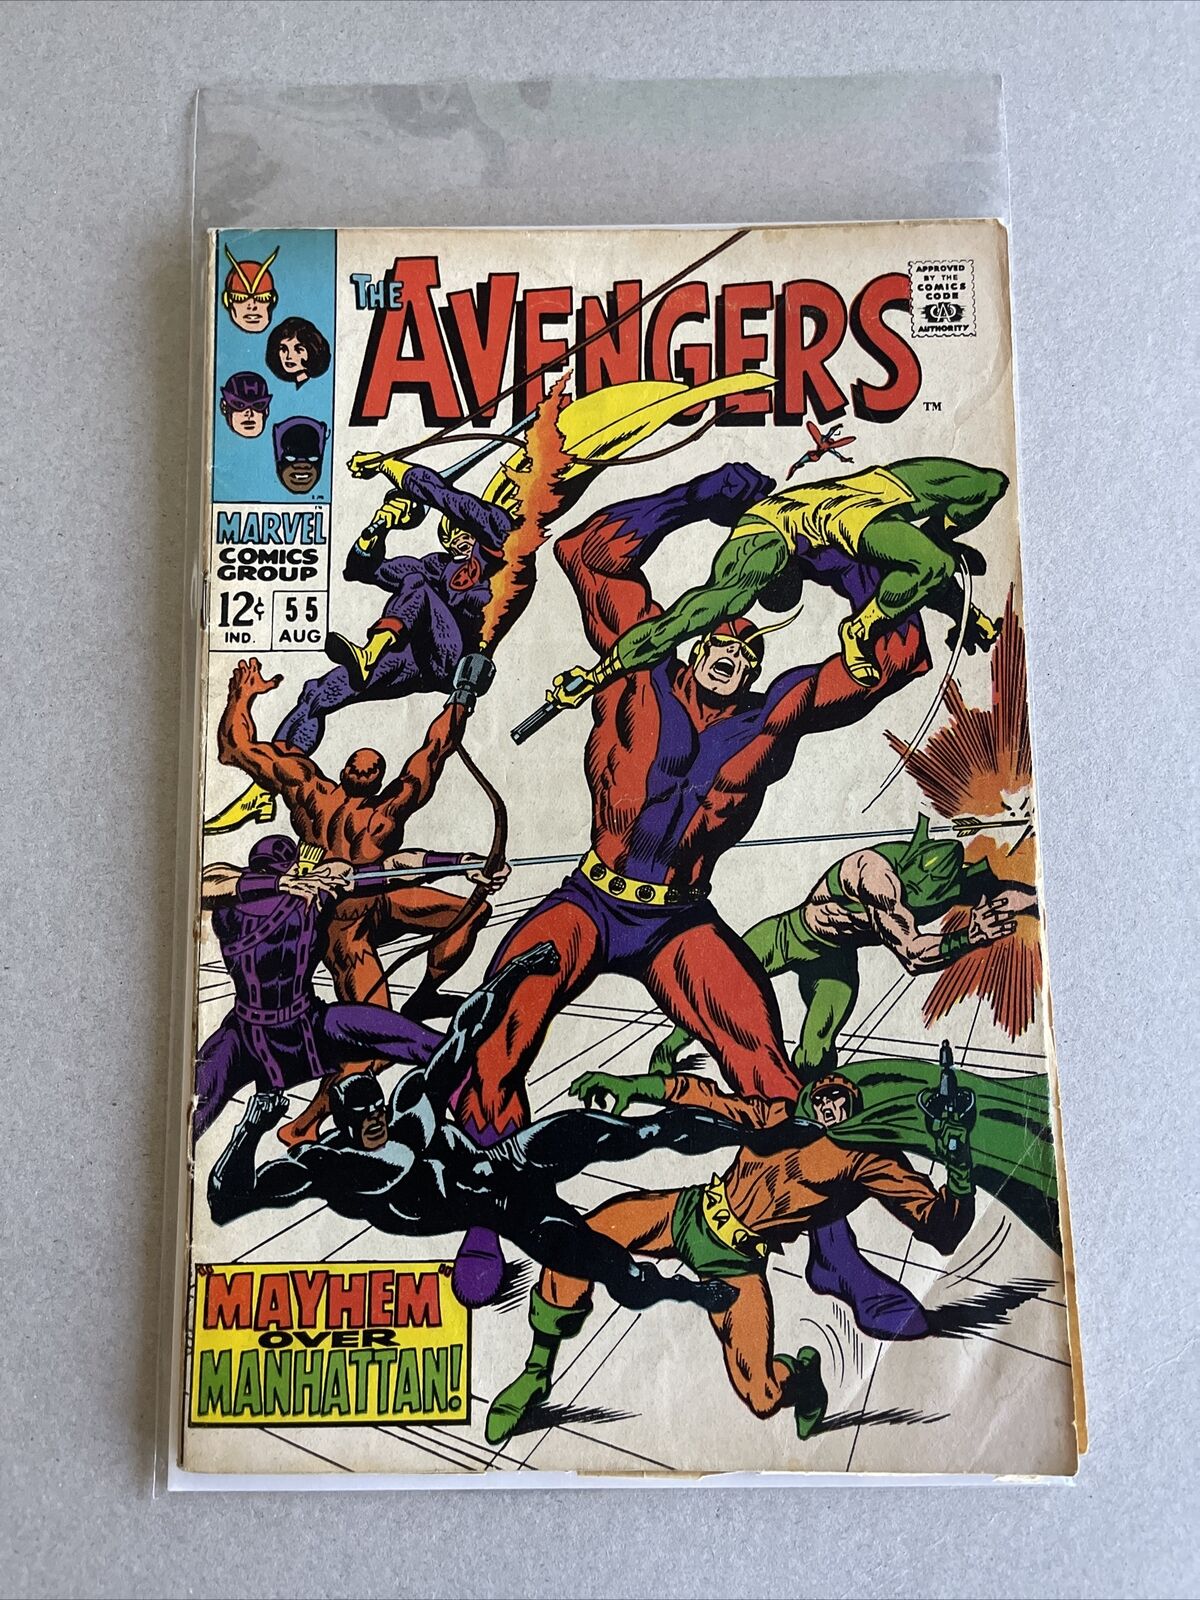 The Avengers #55 (Marvel 1968) 1st Full Appearance of Ultron - Silver Age Key